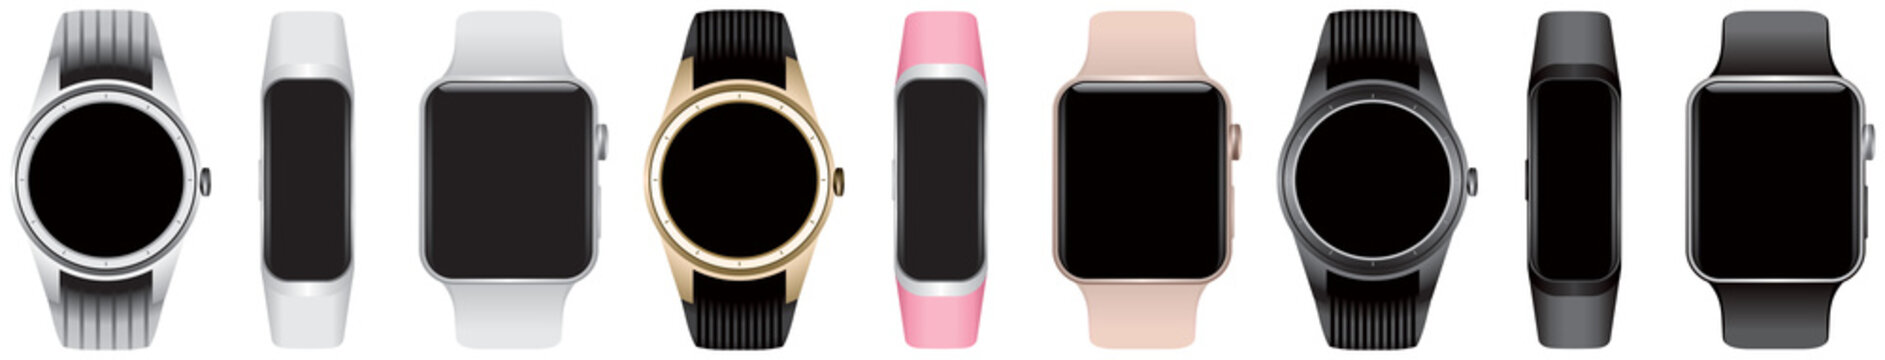 Smart watch with empty screen, same types of the smartwatch or smart belt in different color and form factor isolated with blank black screens realistic vector illustration for the design or mockup 